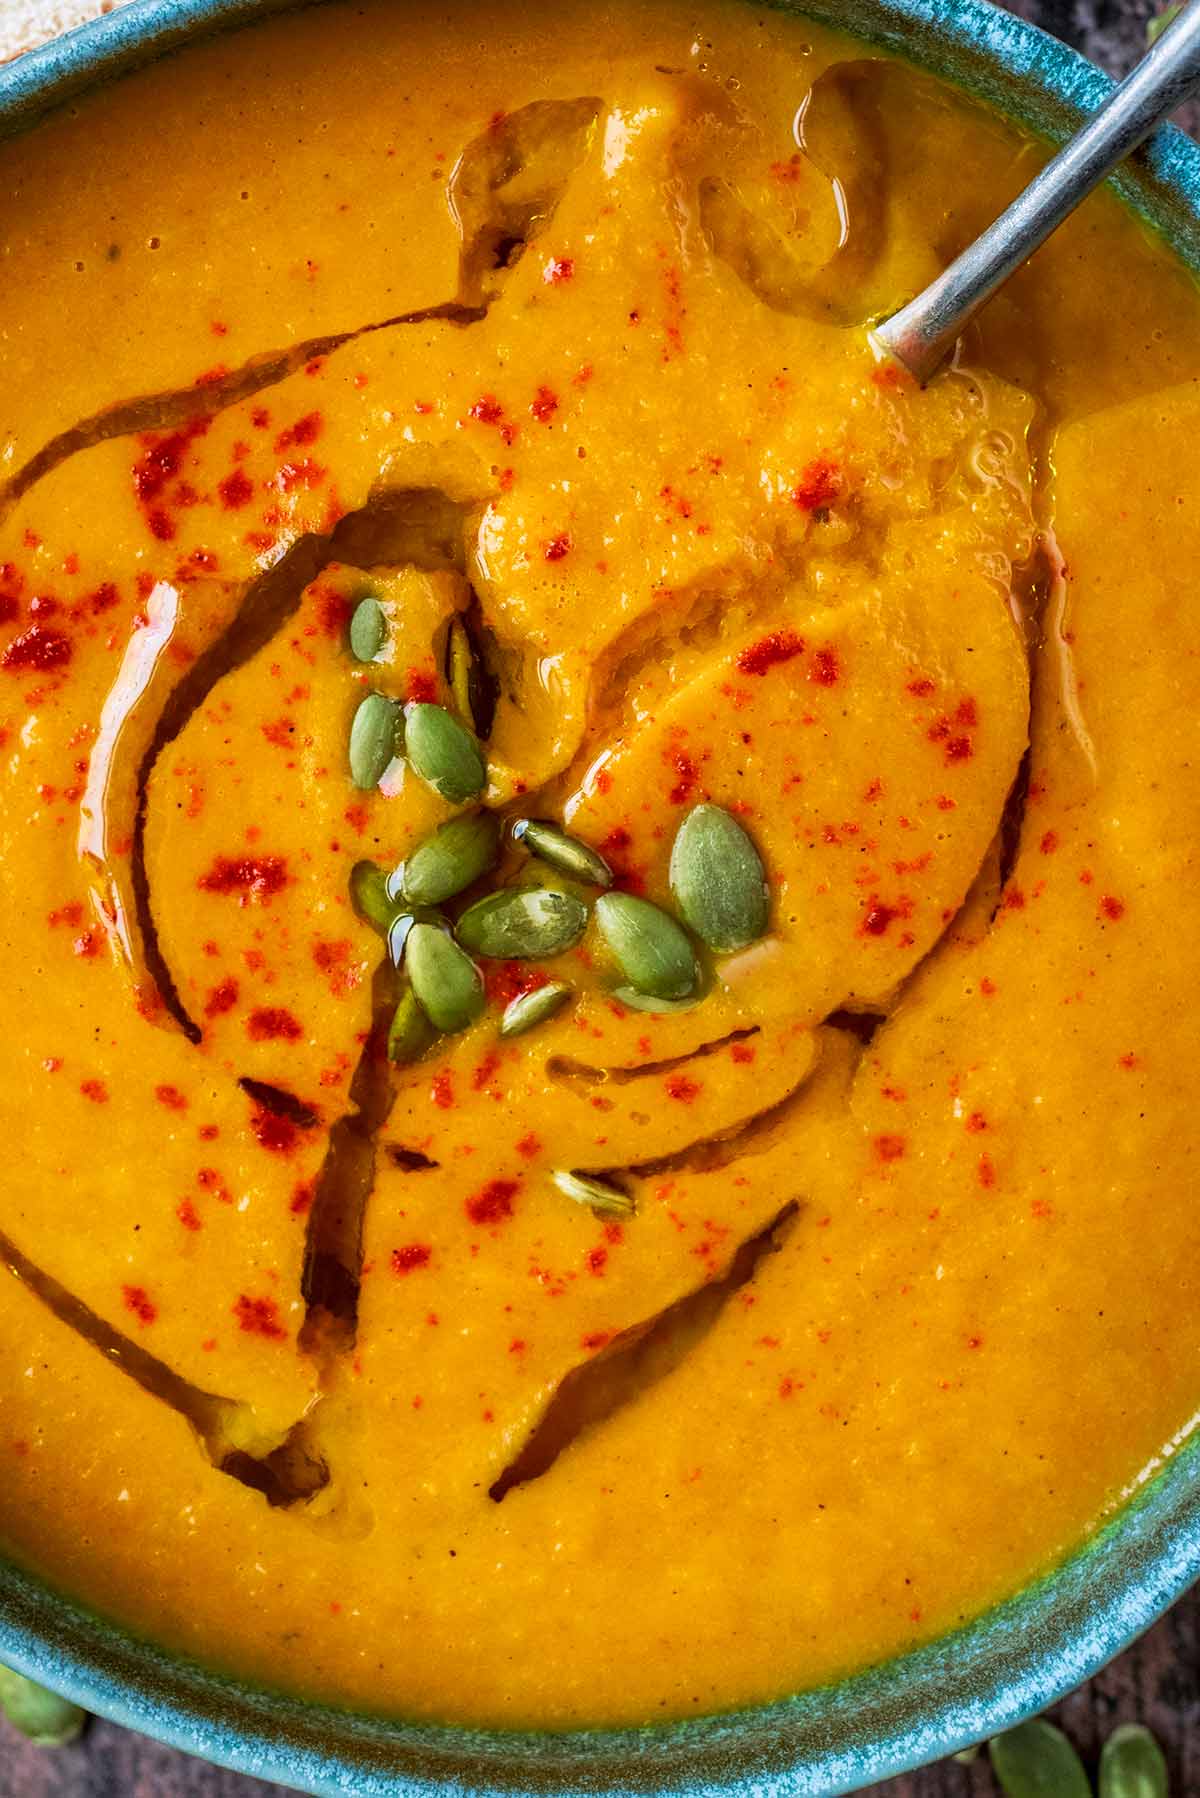 Pumpkin seeds and a drizzle of oil on top of a bowl of orange coloured soup.